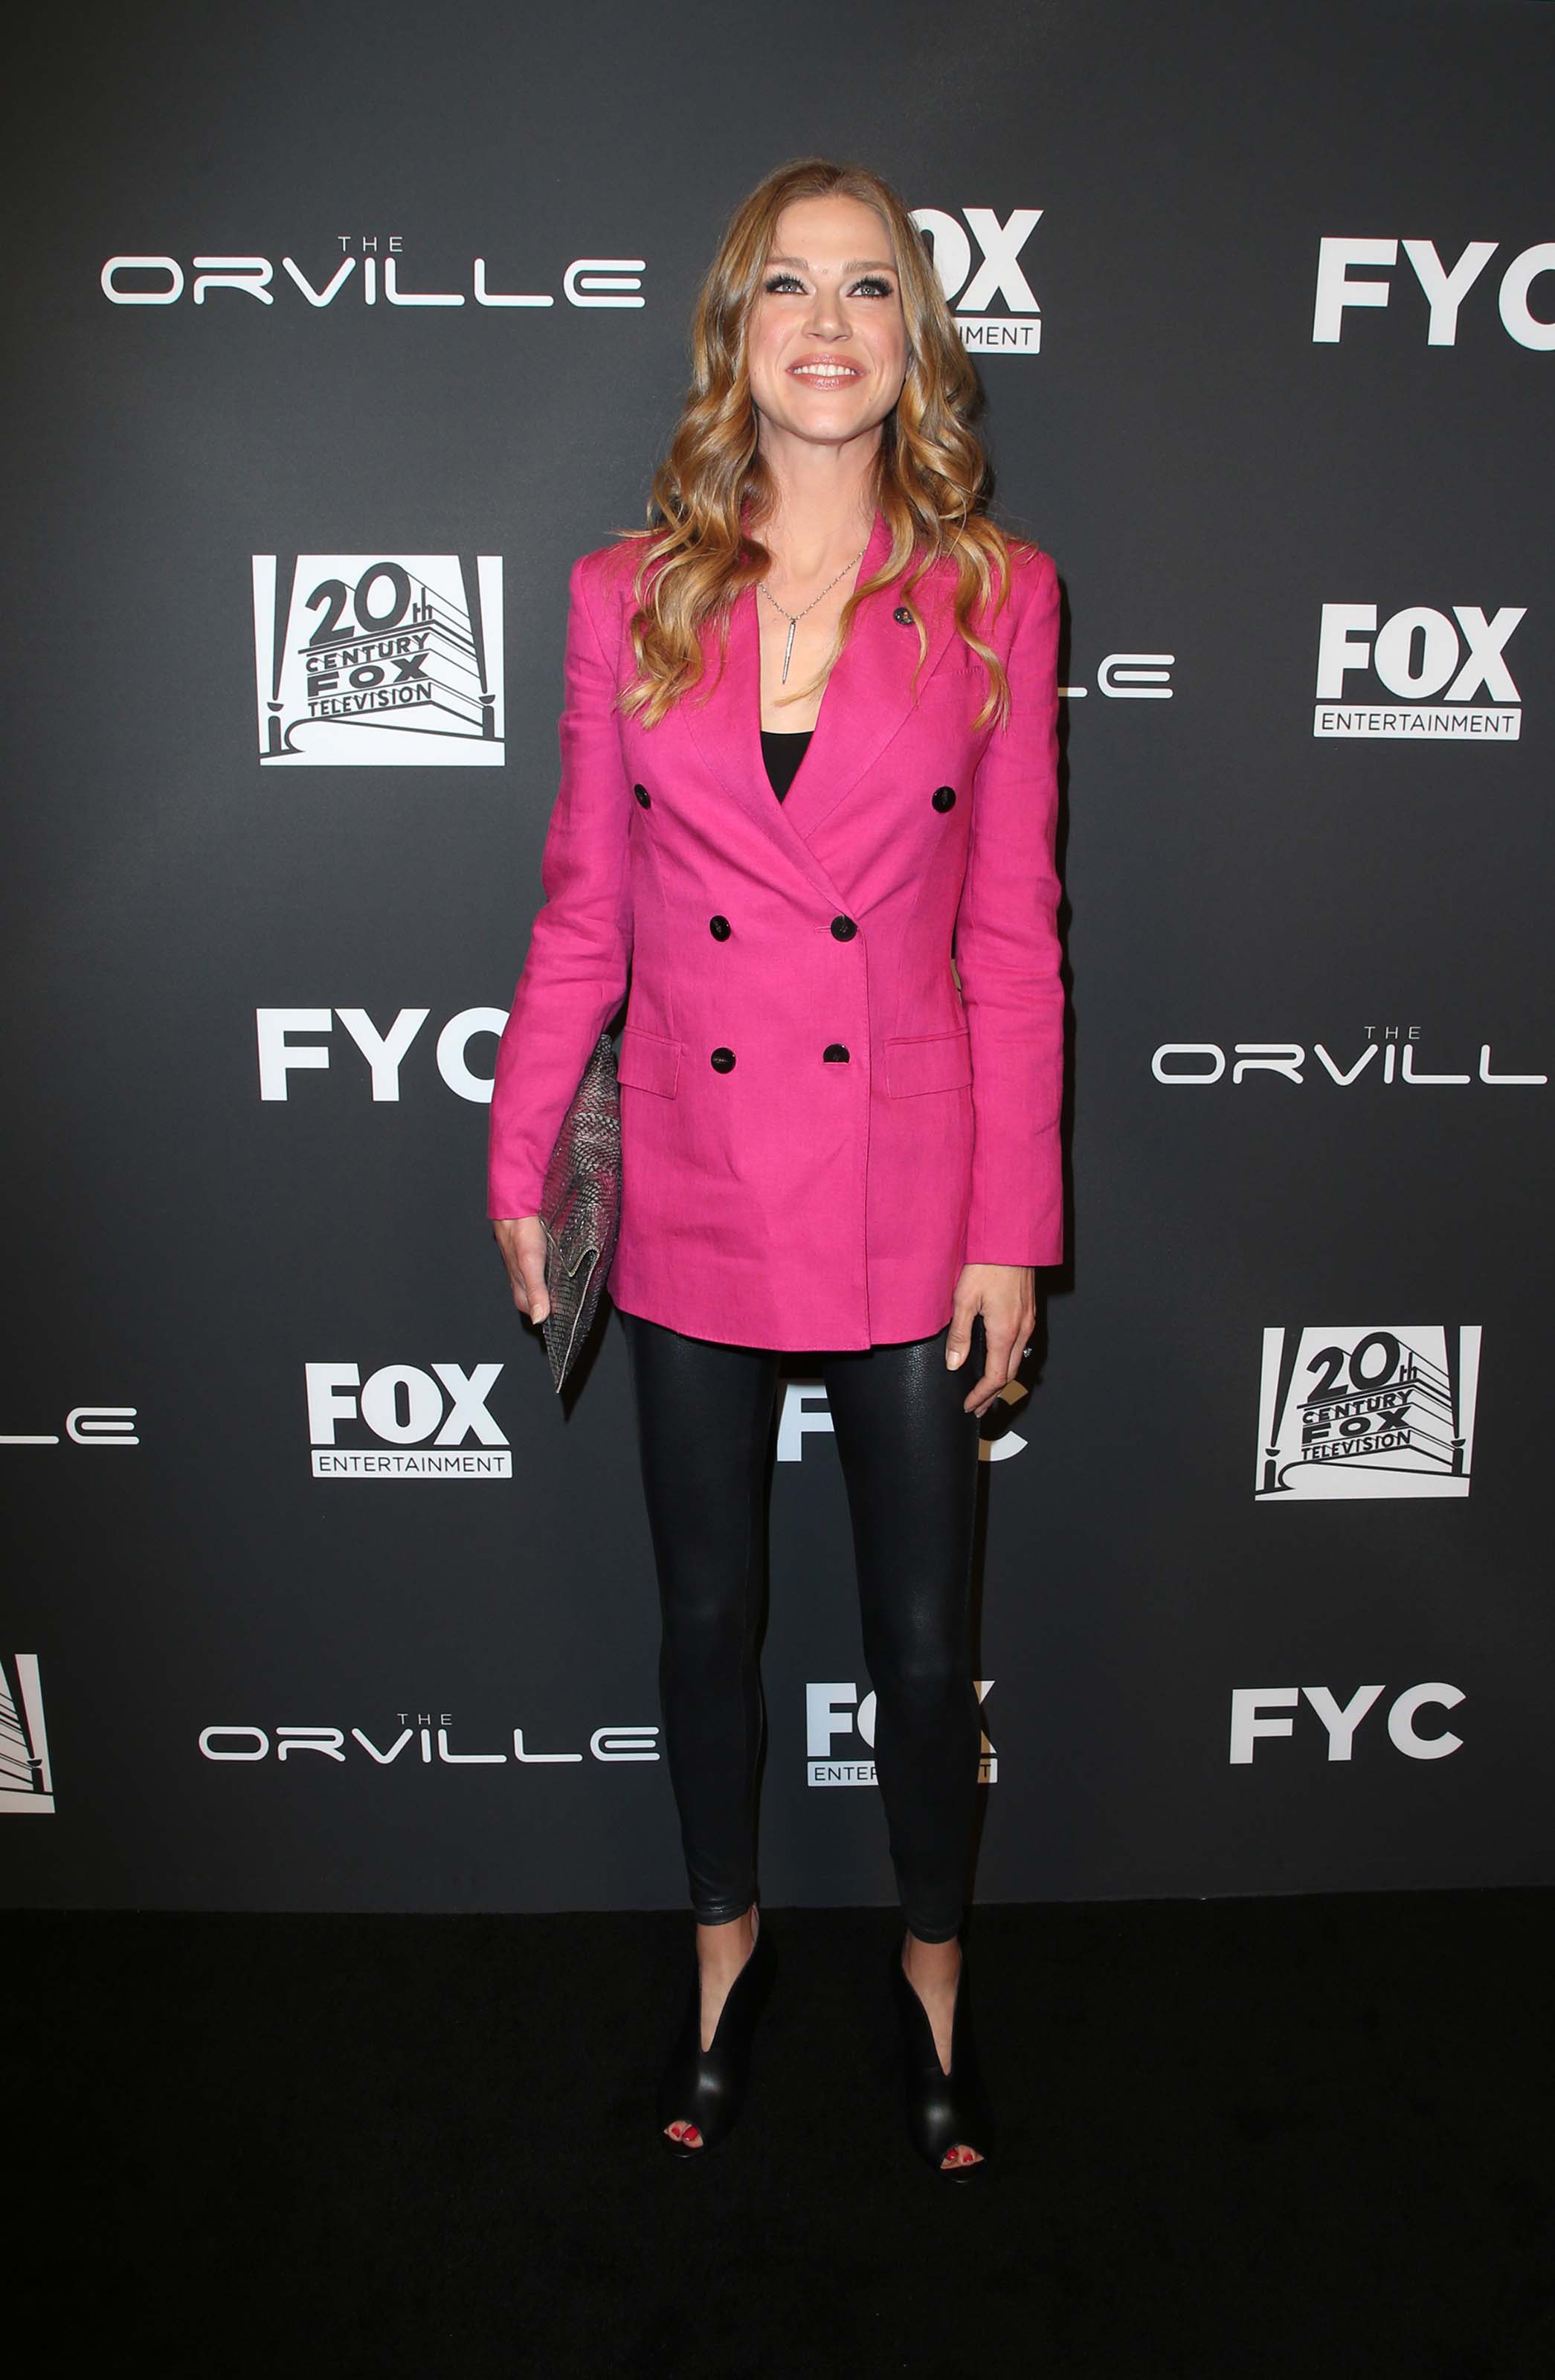 Adrianne Palicki attends The Orville TV Show photocall, Los Angeles 24.04.2019